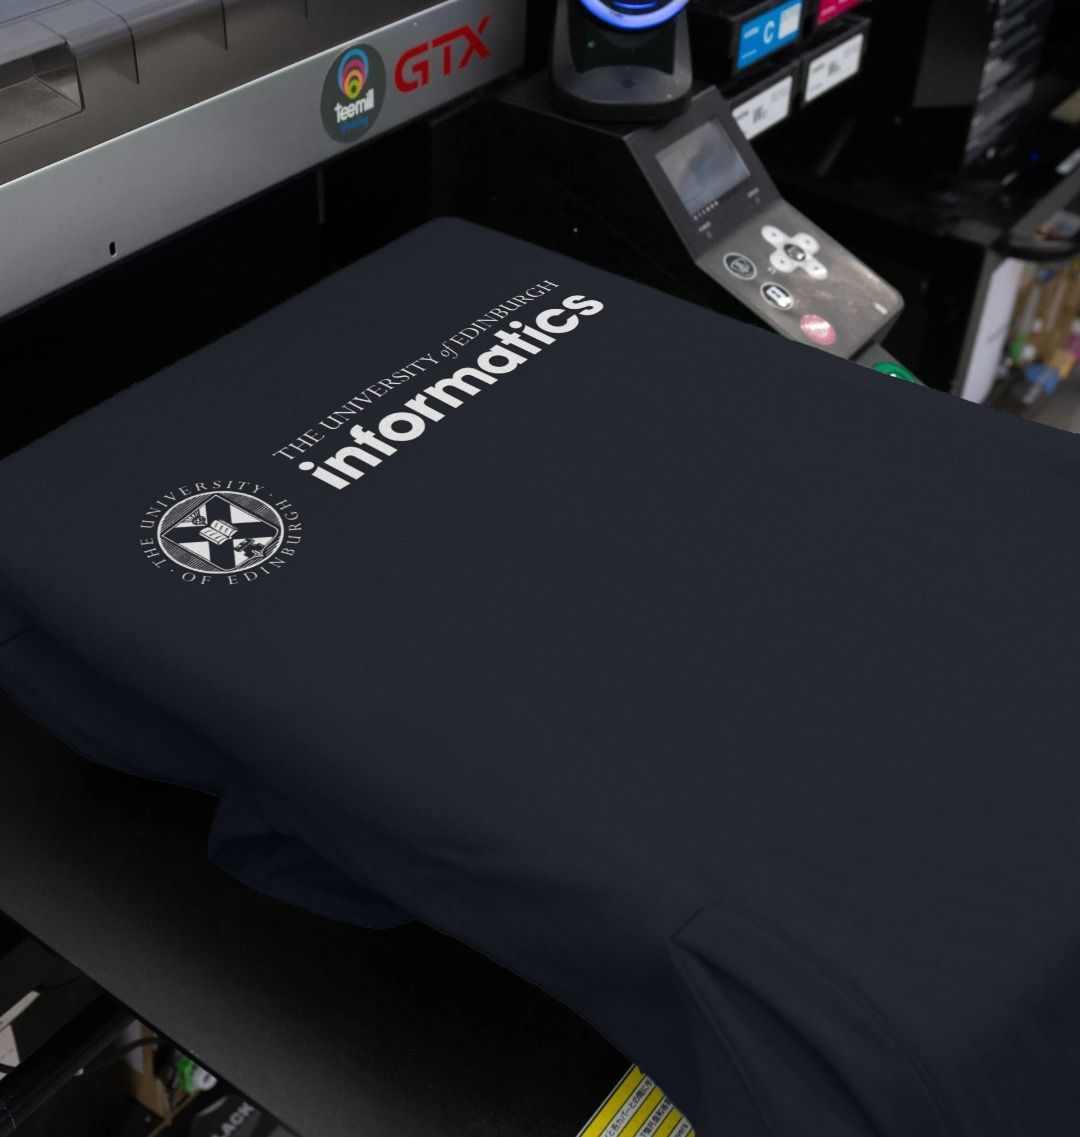 Our School of Informatics Hoodie being printed by our print on demand partner, teemill.